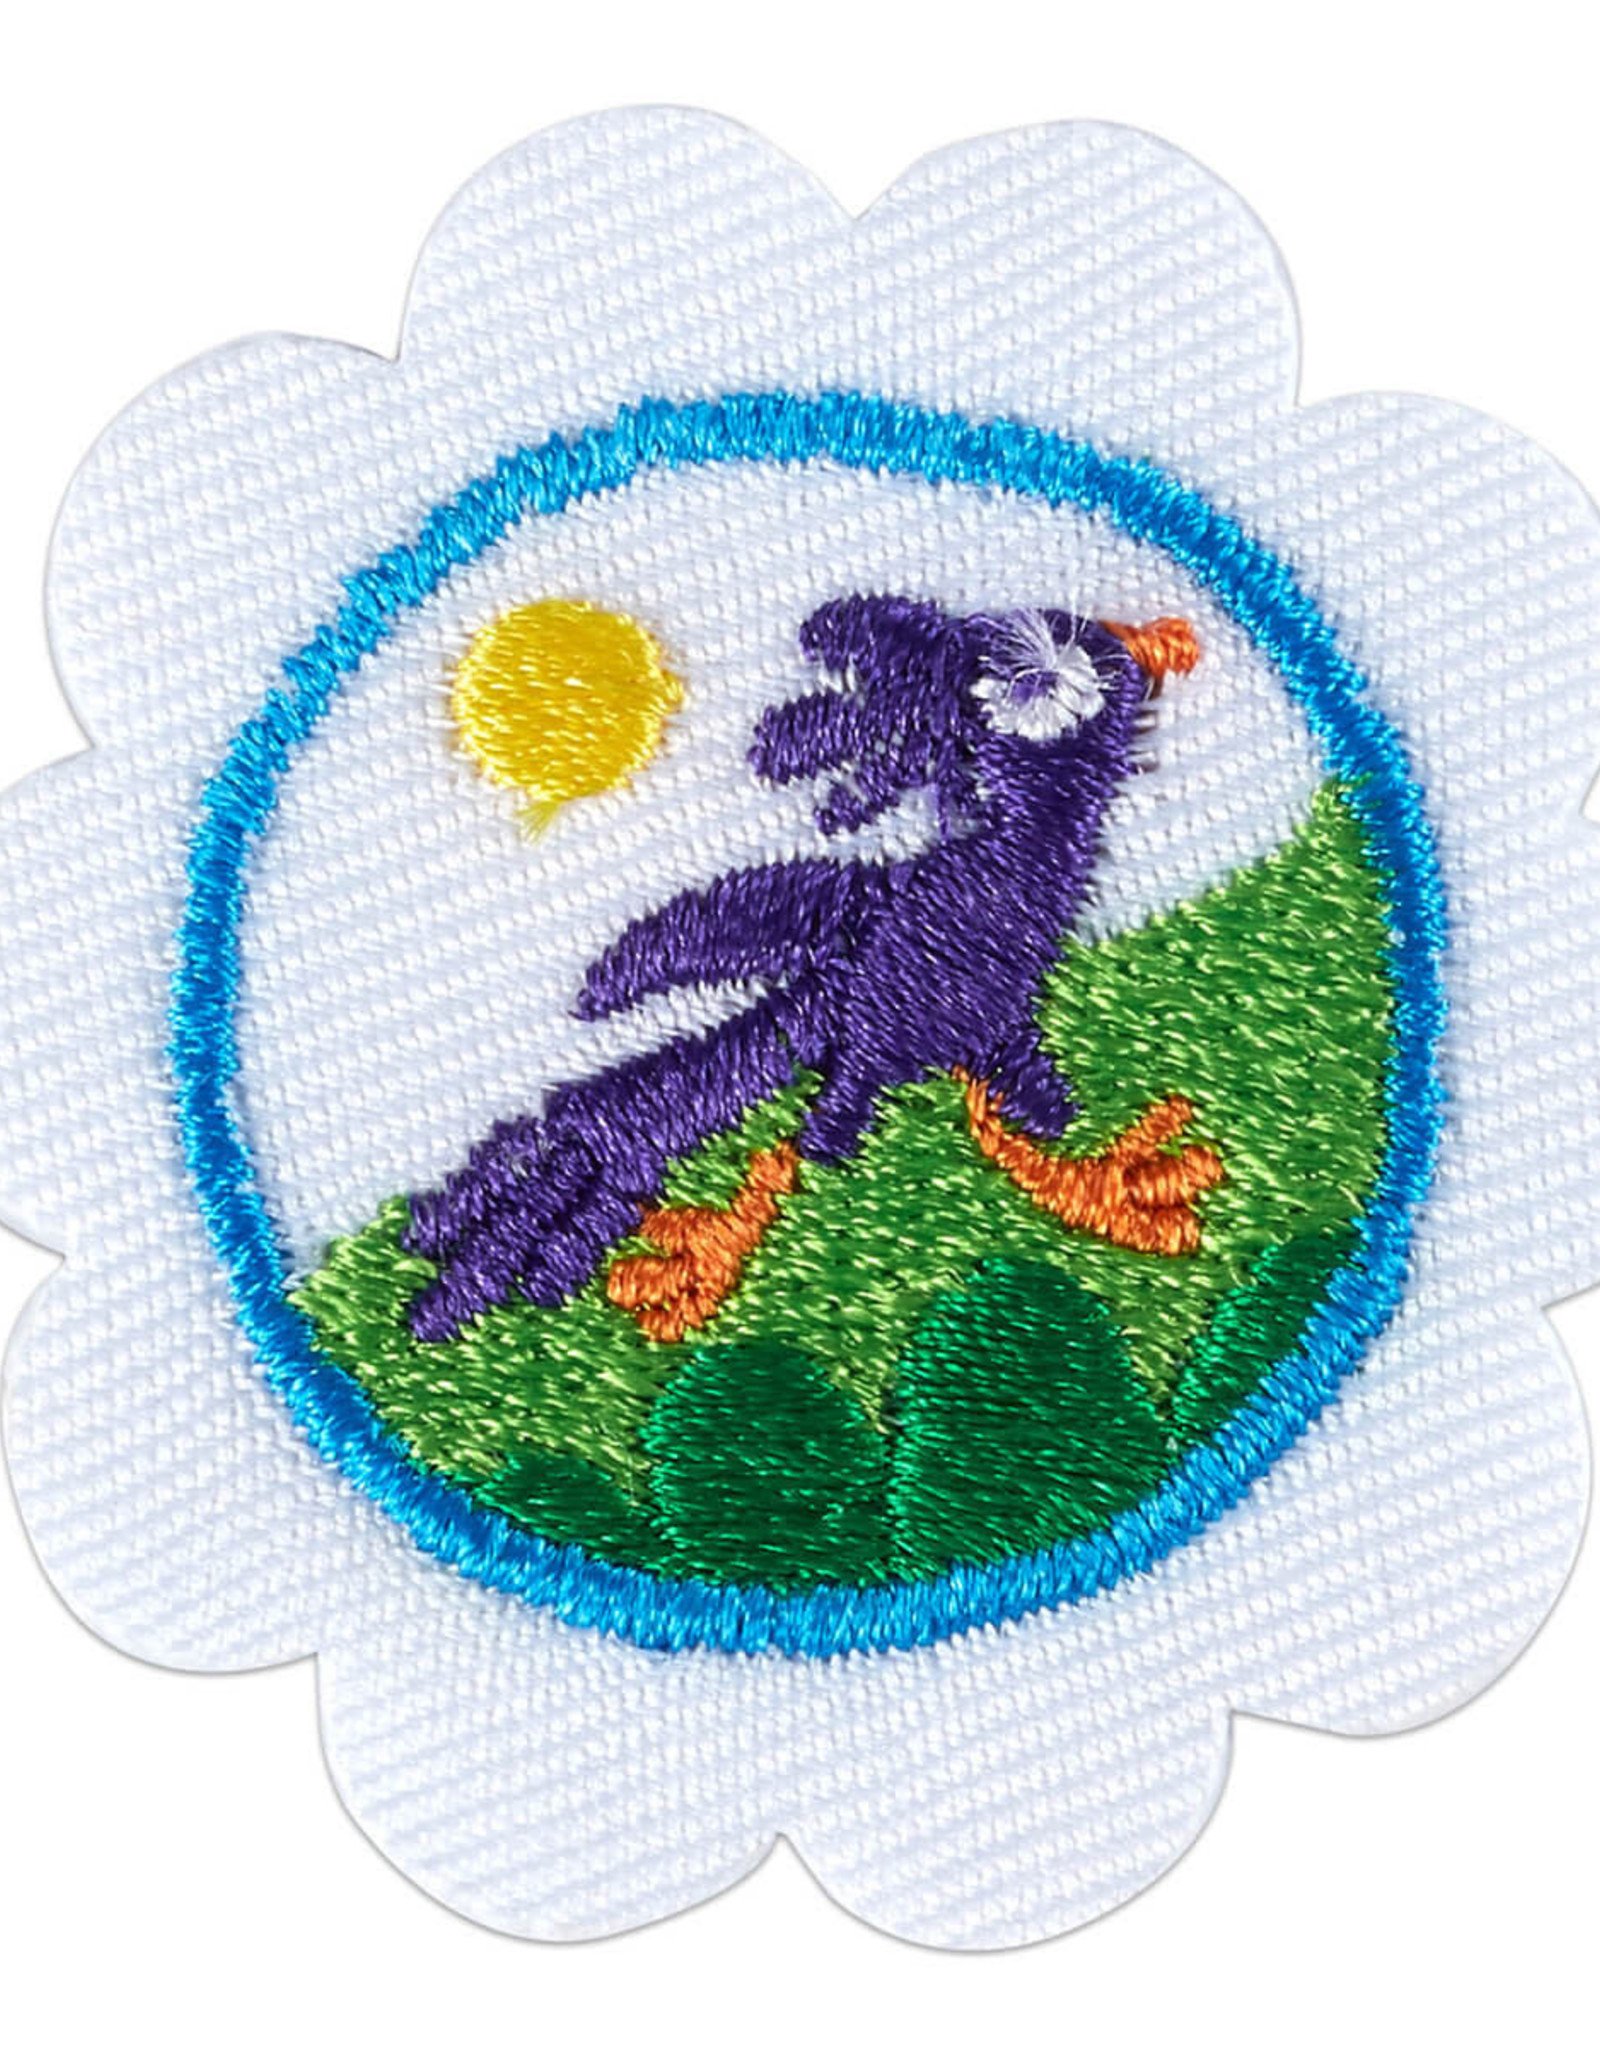 GIRL SCOUTS OF THE USA Daisy Trail Adventure Badge